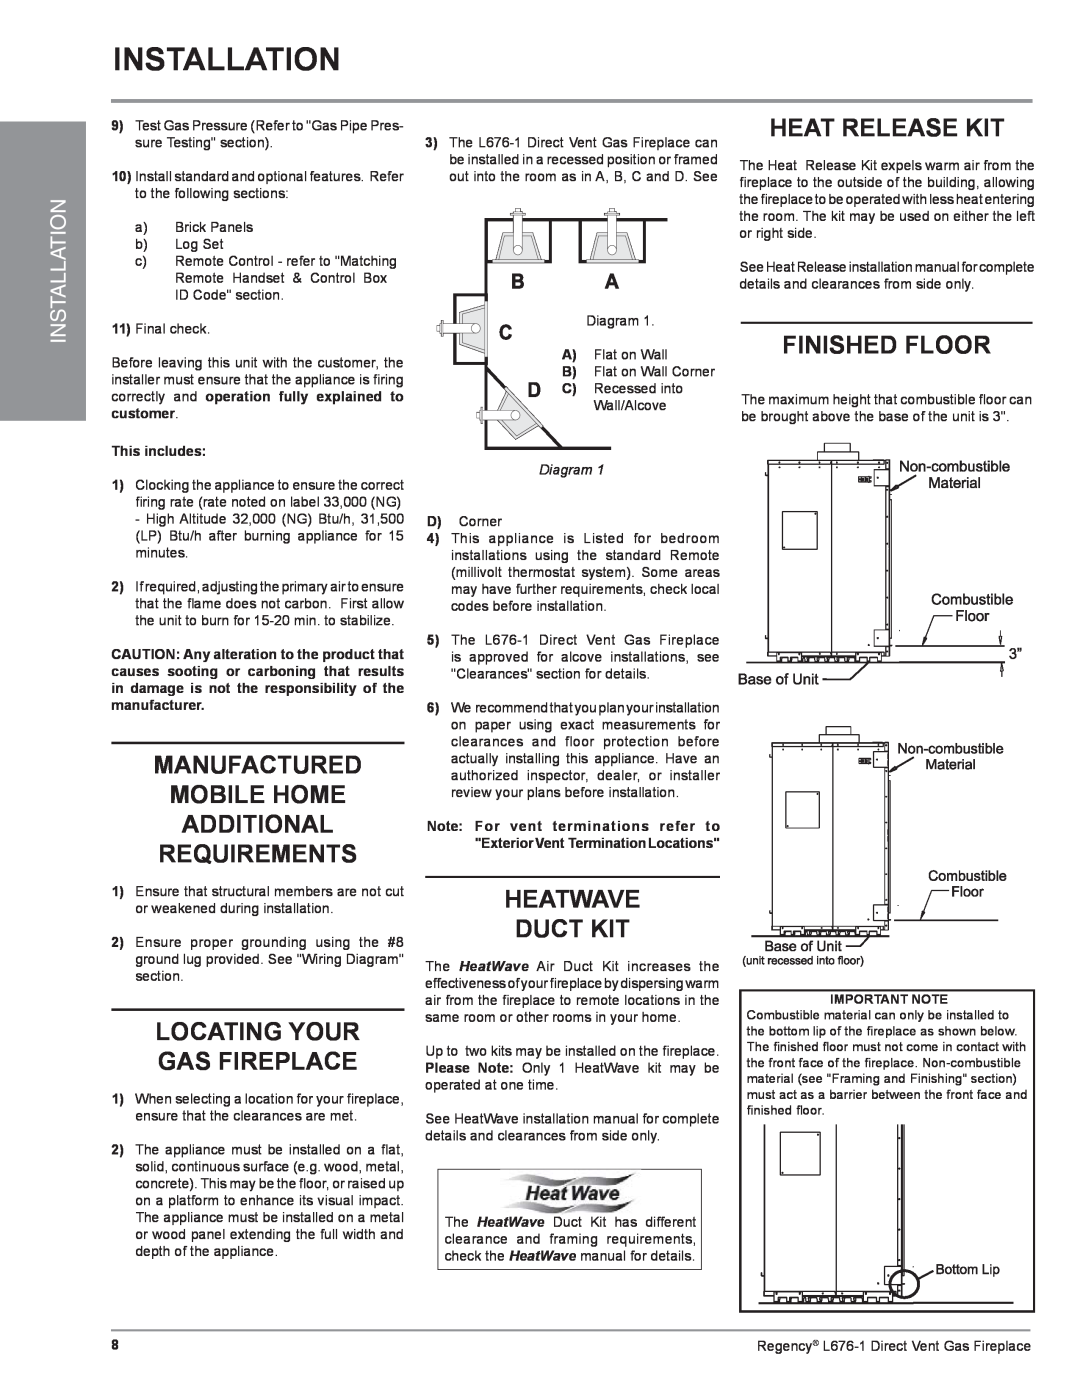 Regency L676-LP1 Installation, Heat Release Kit, Finished Floor, Manufactured Mobile Home Additional Requirements, Diagram 